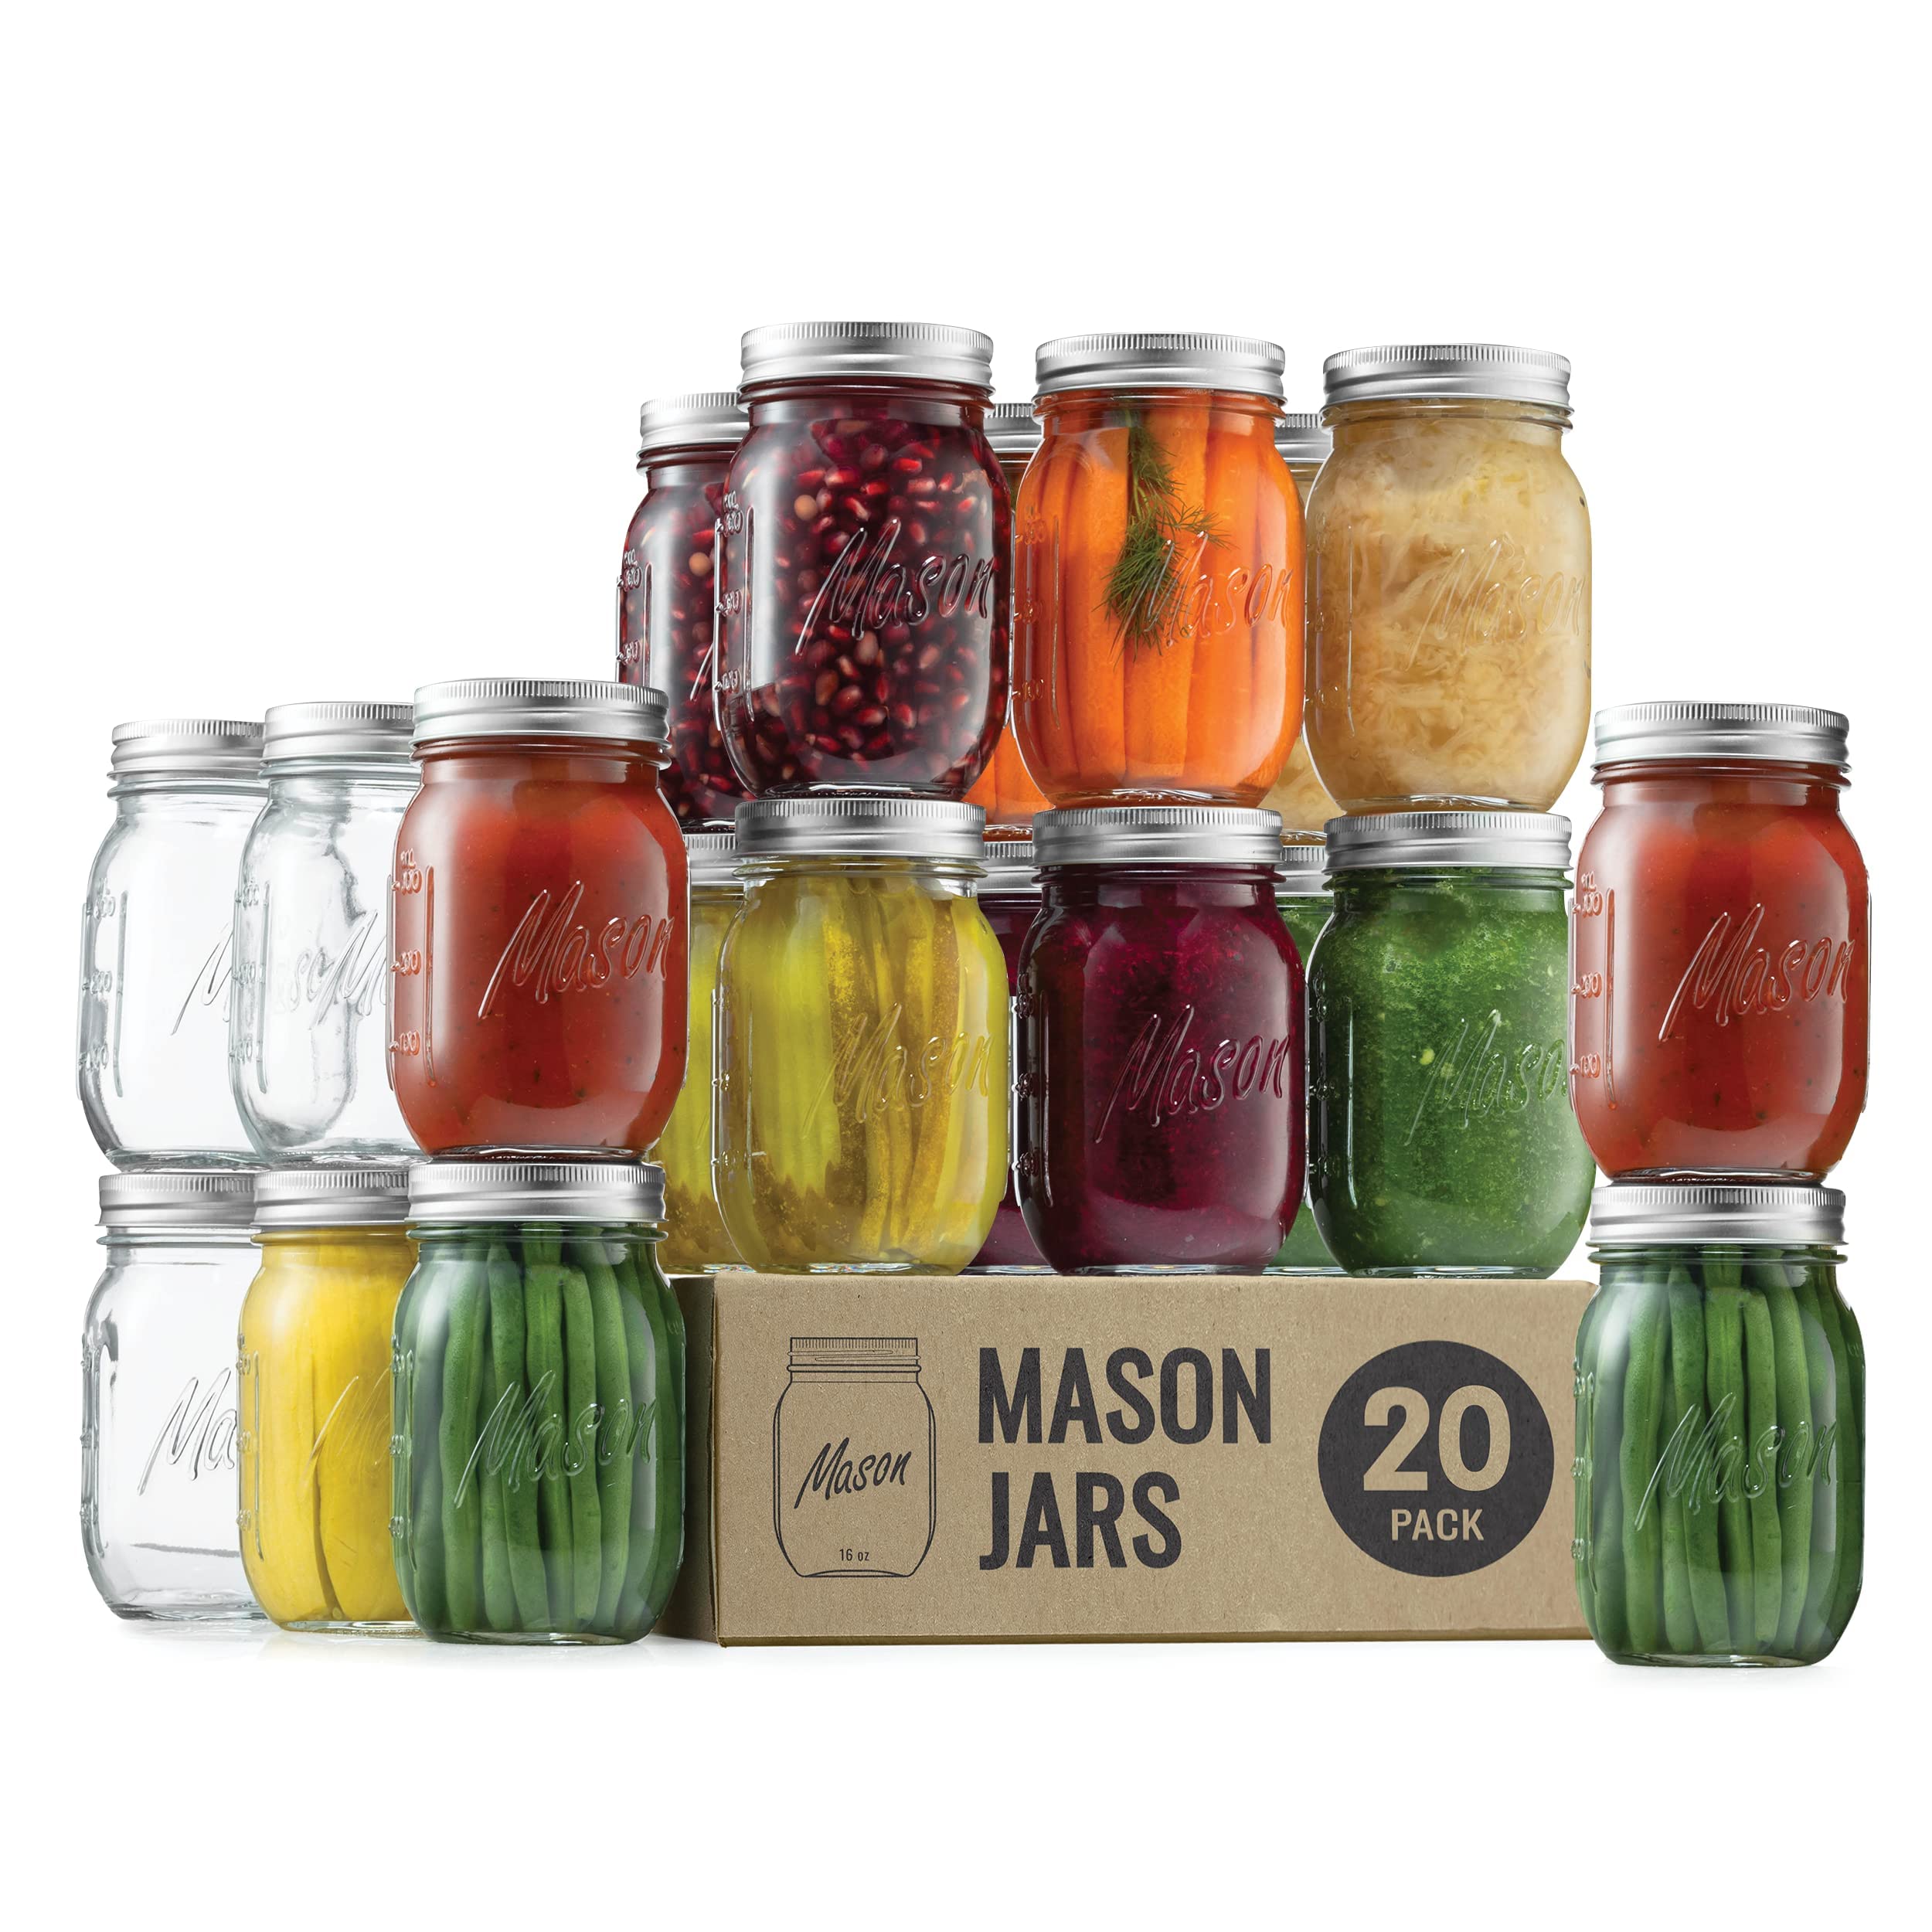 Paksh Novelty Mason Jars 16 oz - 20-Pack Regular Mouth glass Jars with Lid & Seal Bands - Airtight container for Pickling, canni